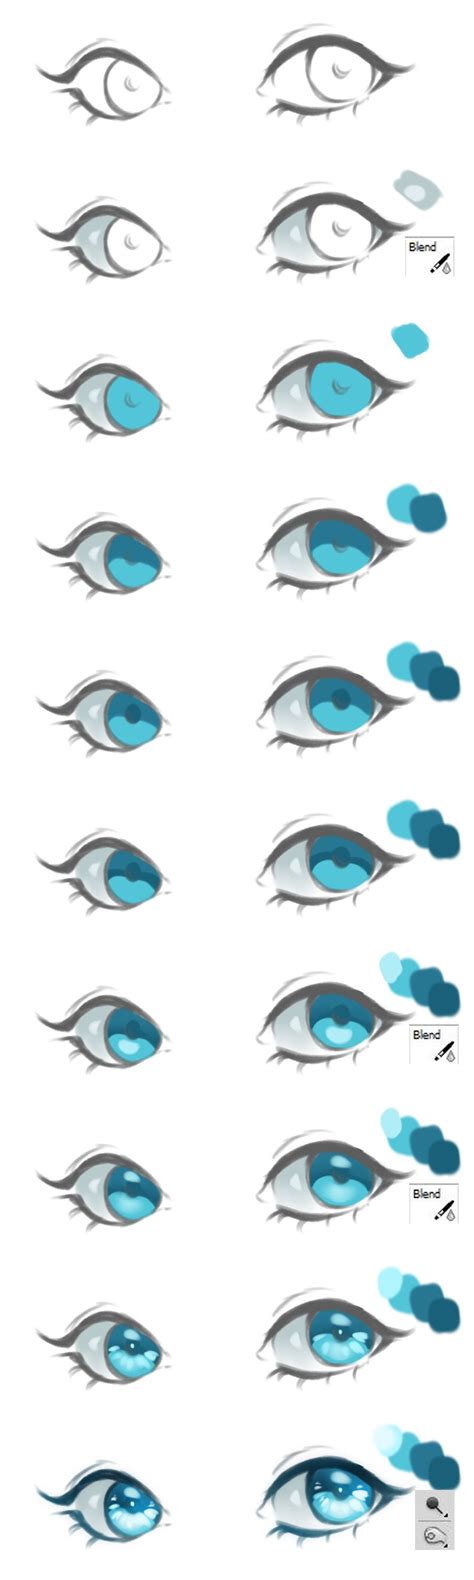 With normal eyes, draw the iris close to the top eyelid and gently touch the lower eyelid below. Anime Eyes Coloring Tutorial vol.2 by HaloBlaBla | Anime drawings tutorials, Art sketches ...